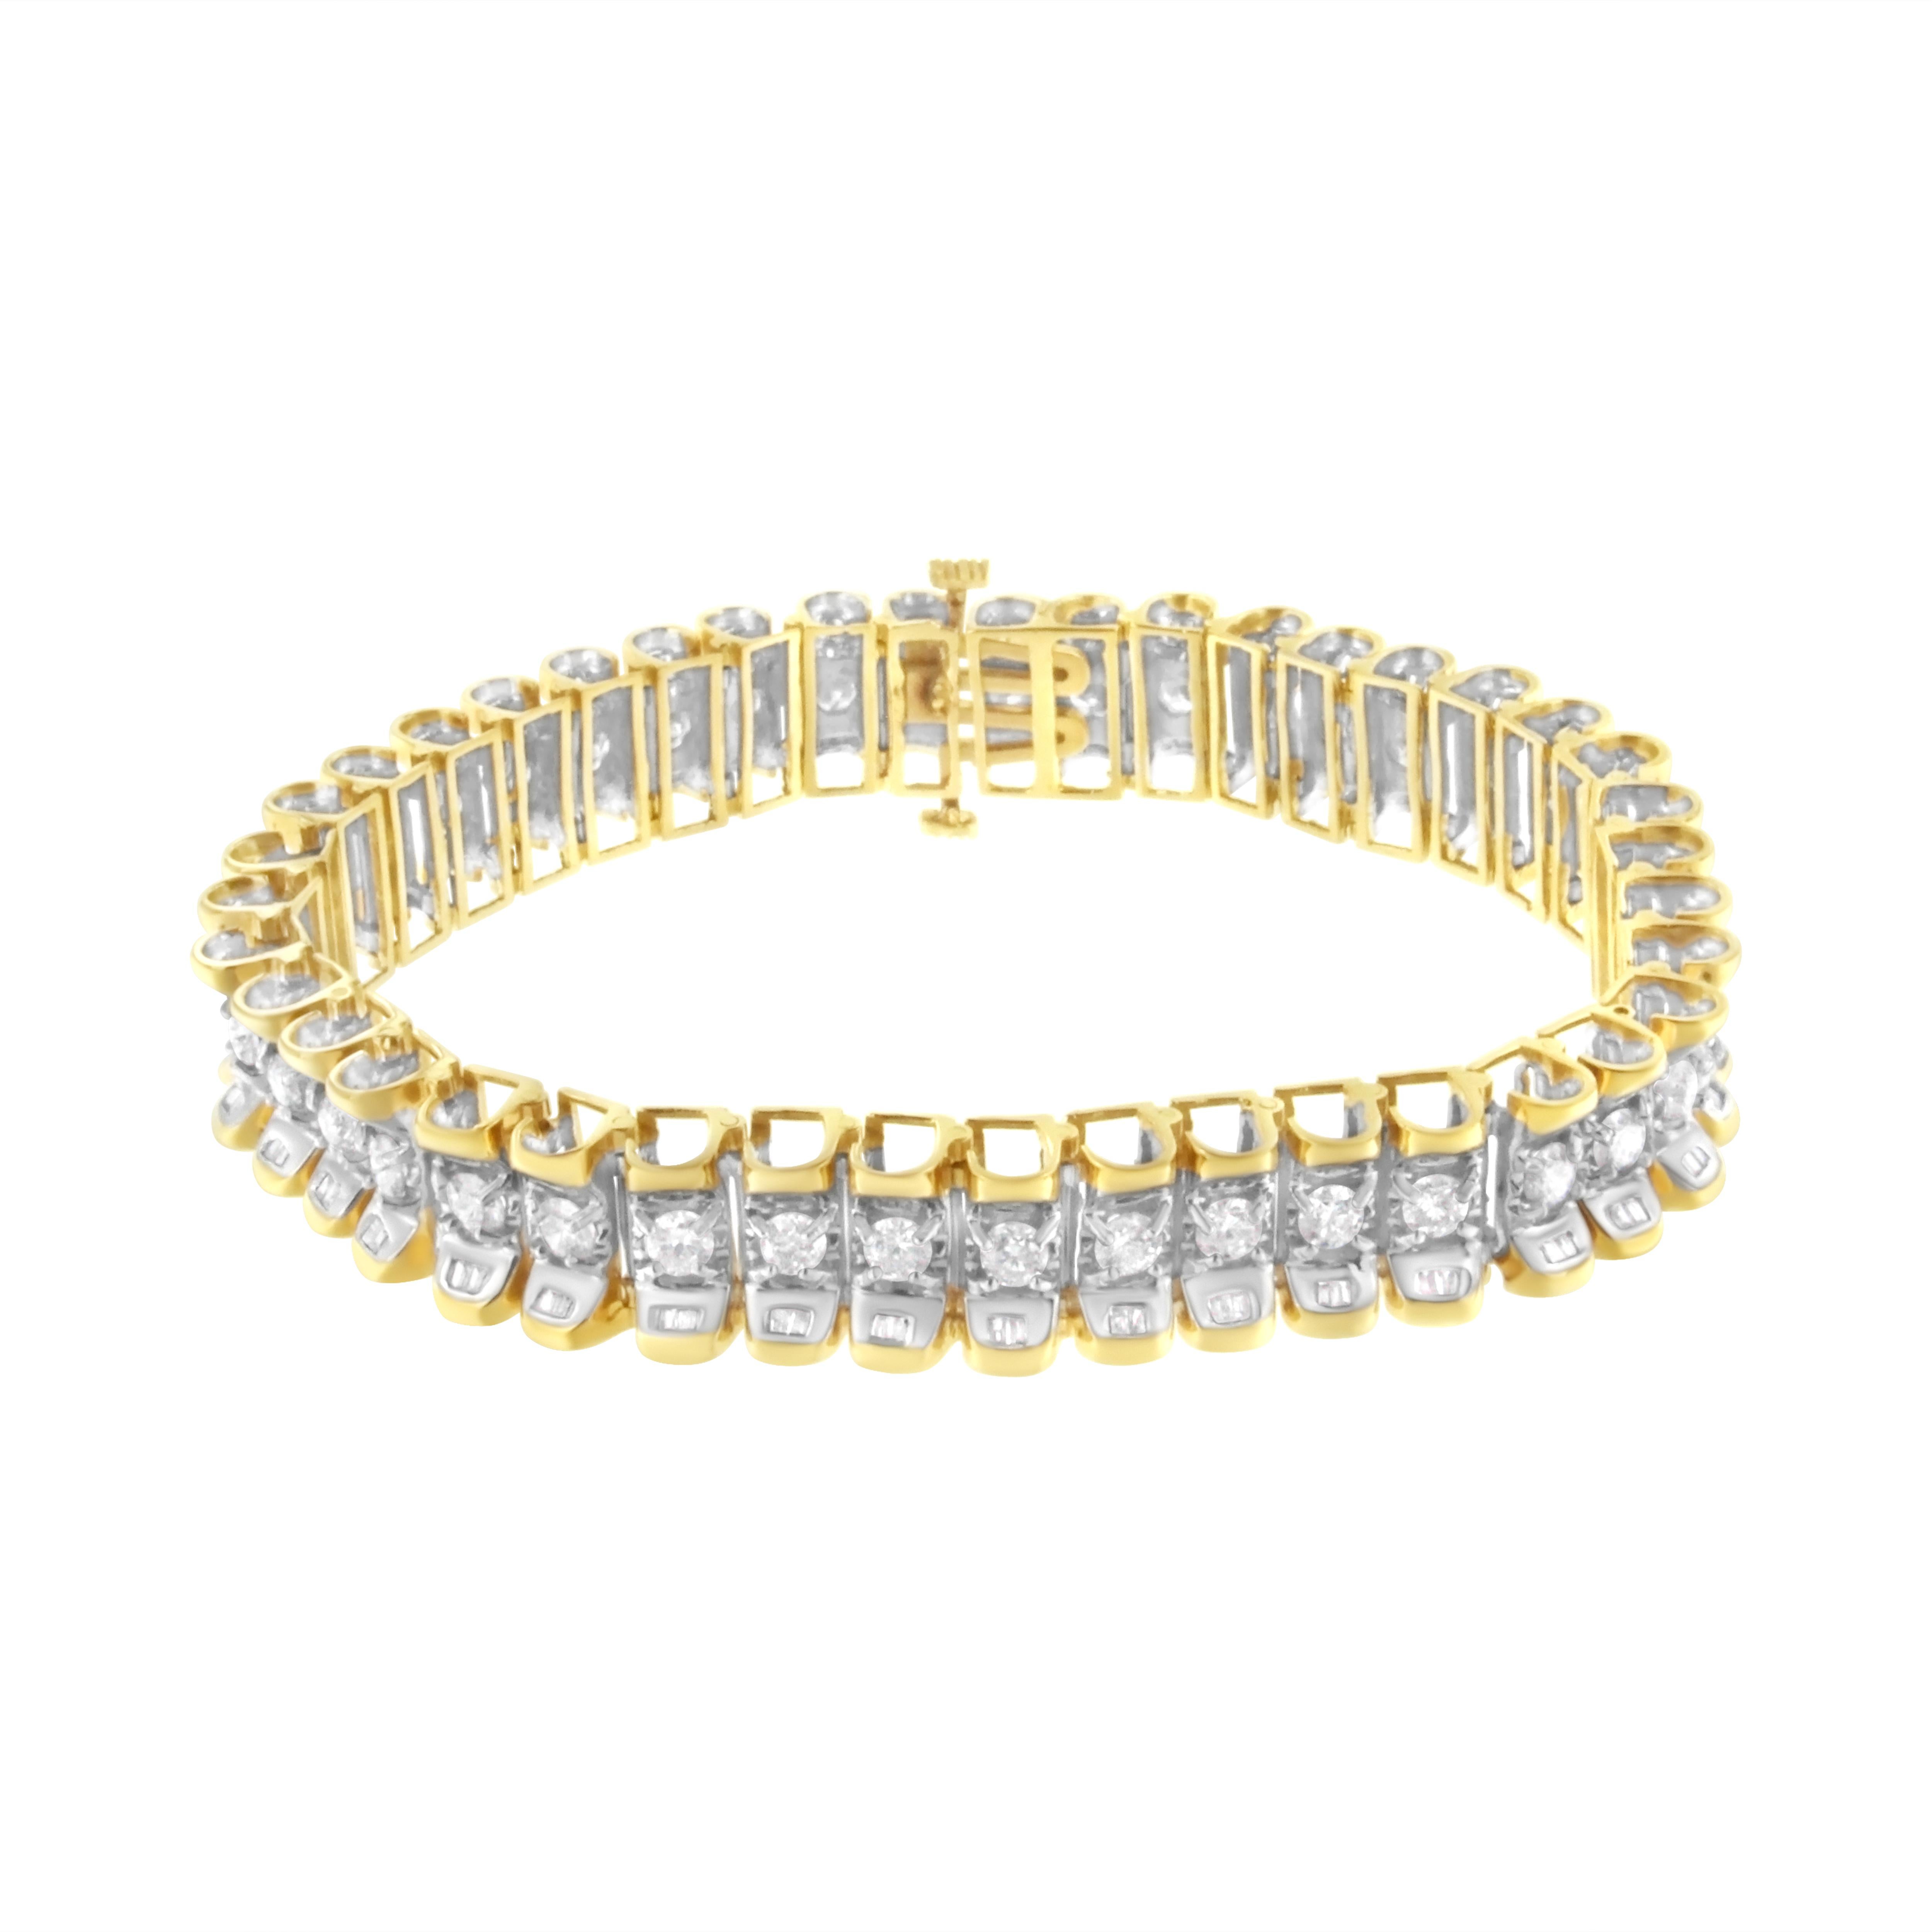 This bold 14k yellow and white gold tennis bracelet features 5 carats of beautiful, natural diamonds. At the center of this design sits round-cut diamonds set in white gold embellished with baguette-cut diamonds on the sides. The outer layer of this